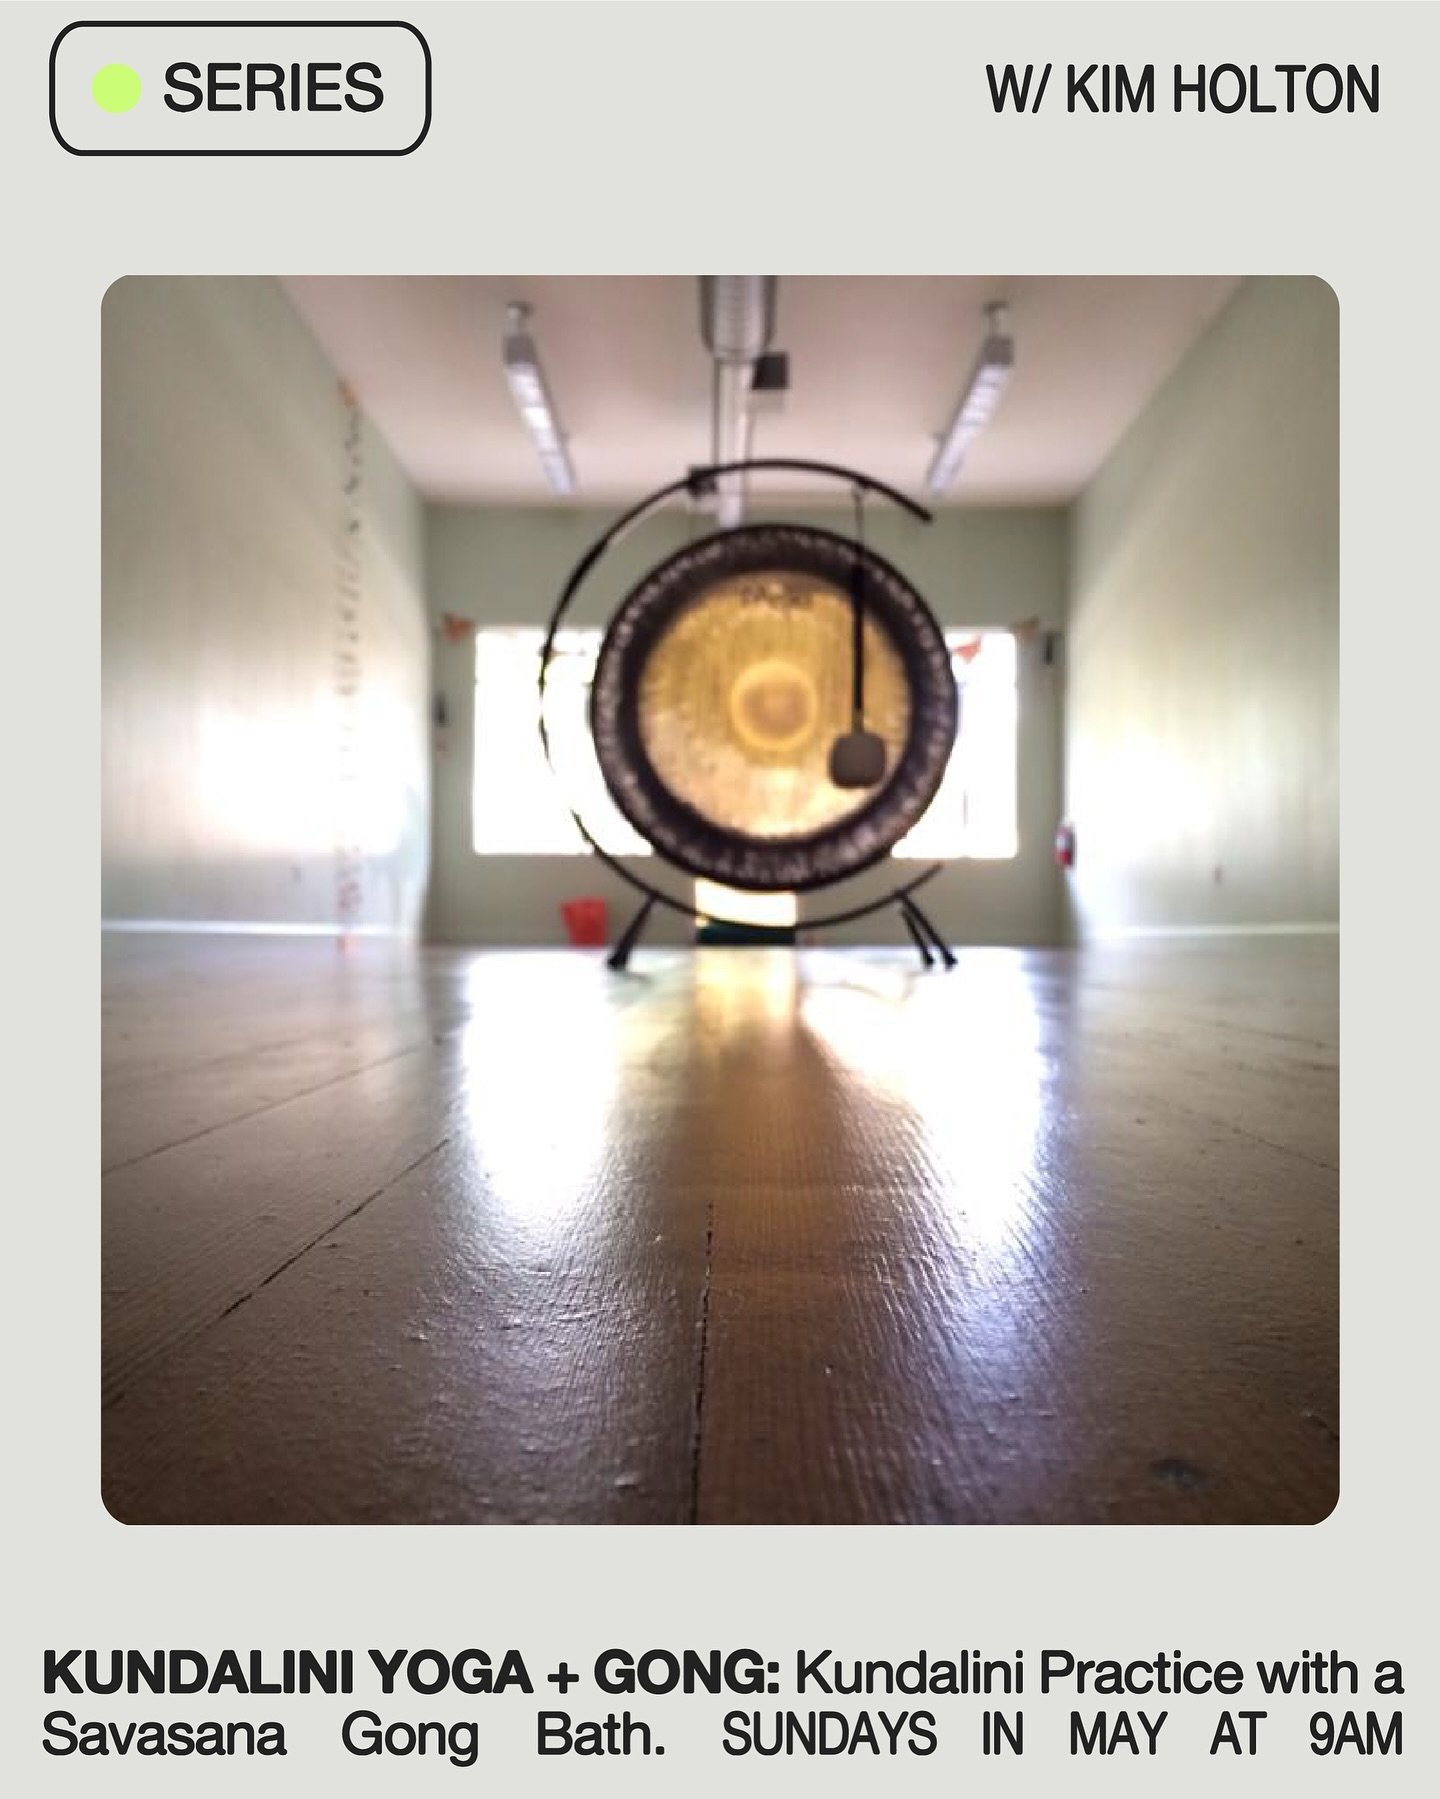 KUNDALINI YOGA AND GONG SERIES WITH KIM HOLTON
SUNDAYS IN MAY FROM 9-10:15AM

@mkimholton is bringing her gong back to Kardiya on Sundays in May starting this weekend. Working in the tradition of Kundalini Yoga, we will use heart-opening postures, rh